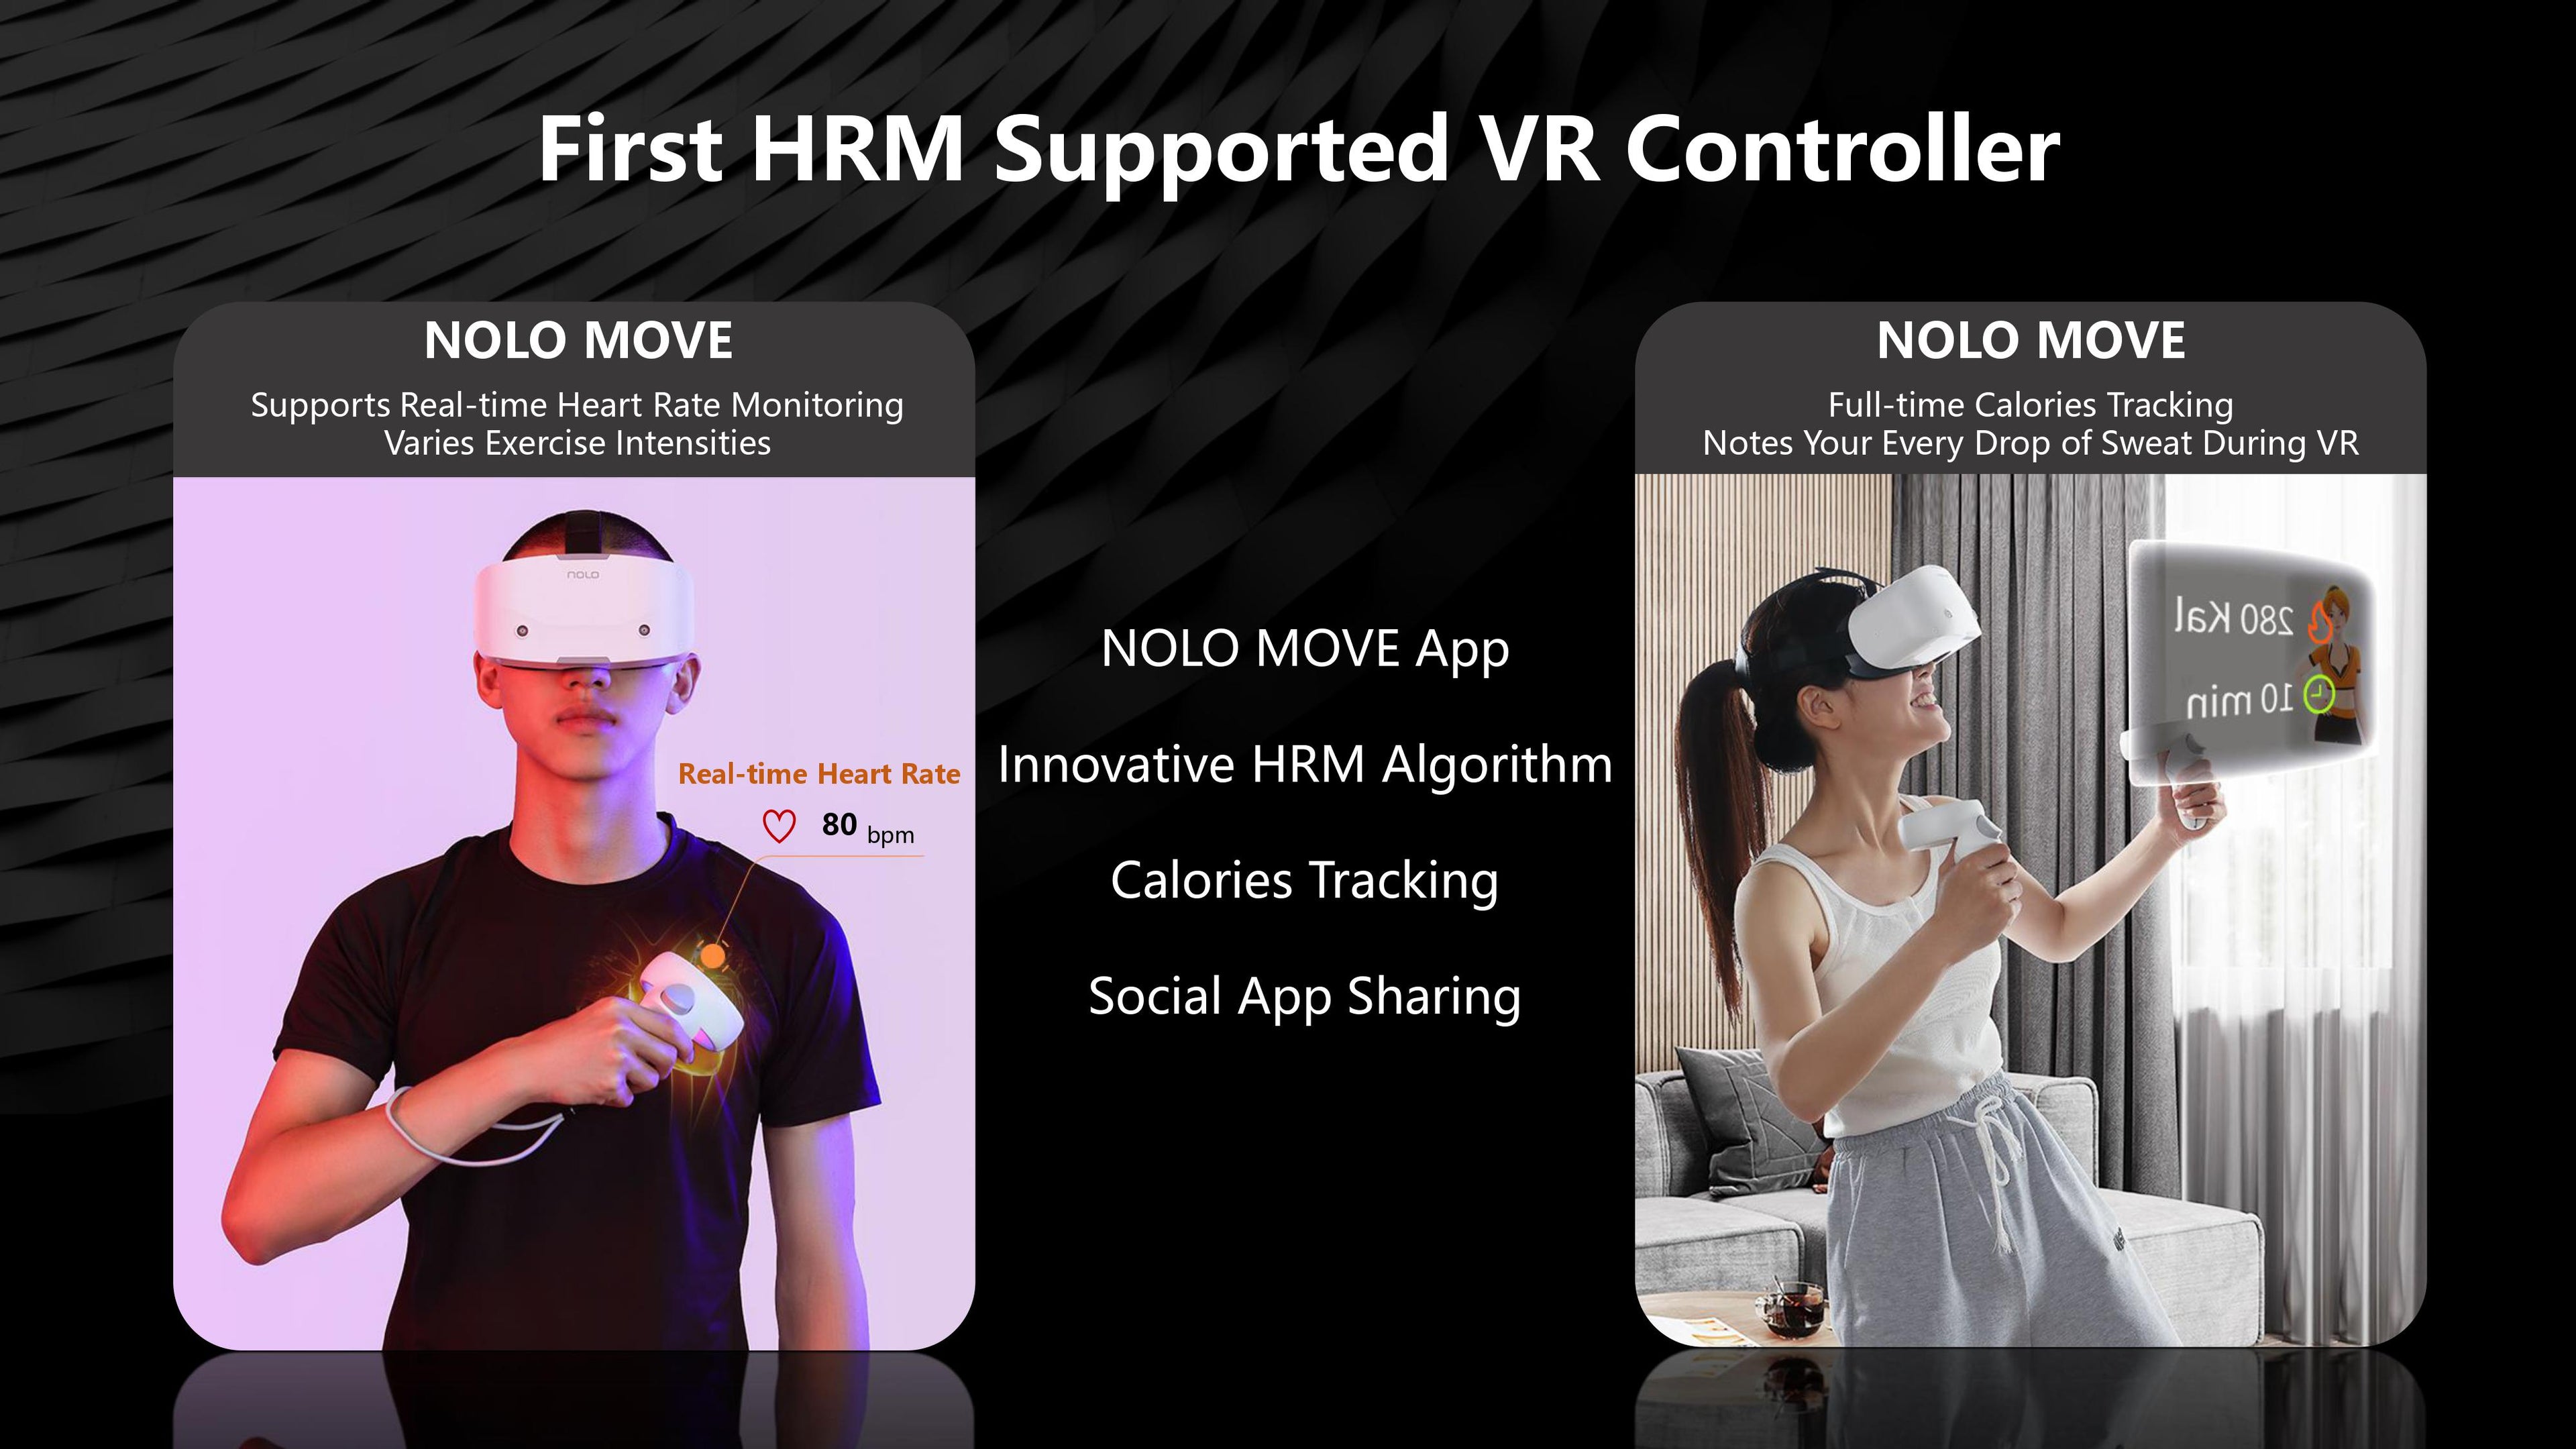 How Excellent Is Nolo Sonic 6DOF All-in-One VR Headset Has The First HRM Supported VR Controller with Nolo Move App